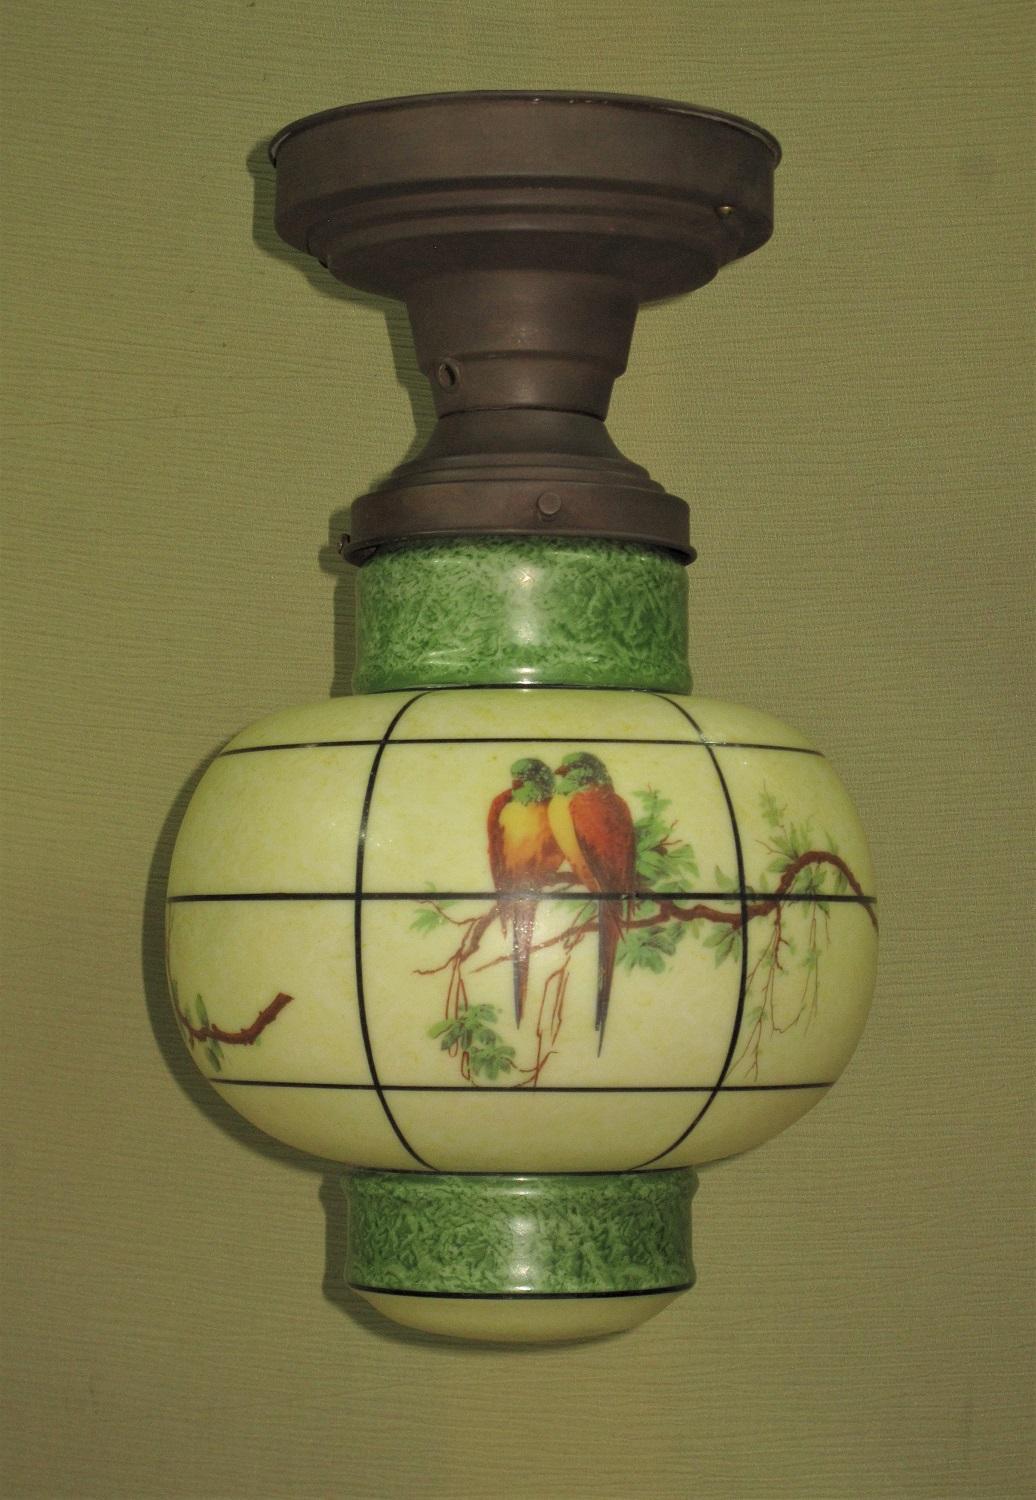 Very well designed vintage globe inspired by the paper lanterns of Japan and China, among others. A rare pattern which we seldom see.
Three panels of hand stenciled Parrots surround the globe with two designs repeating. 